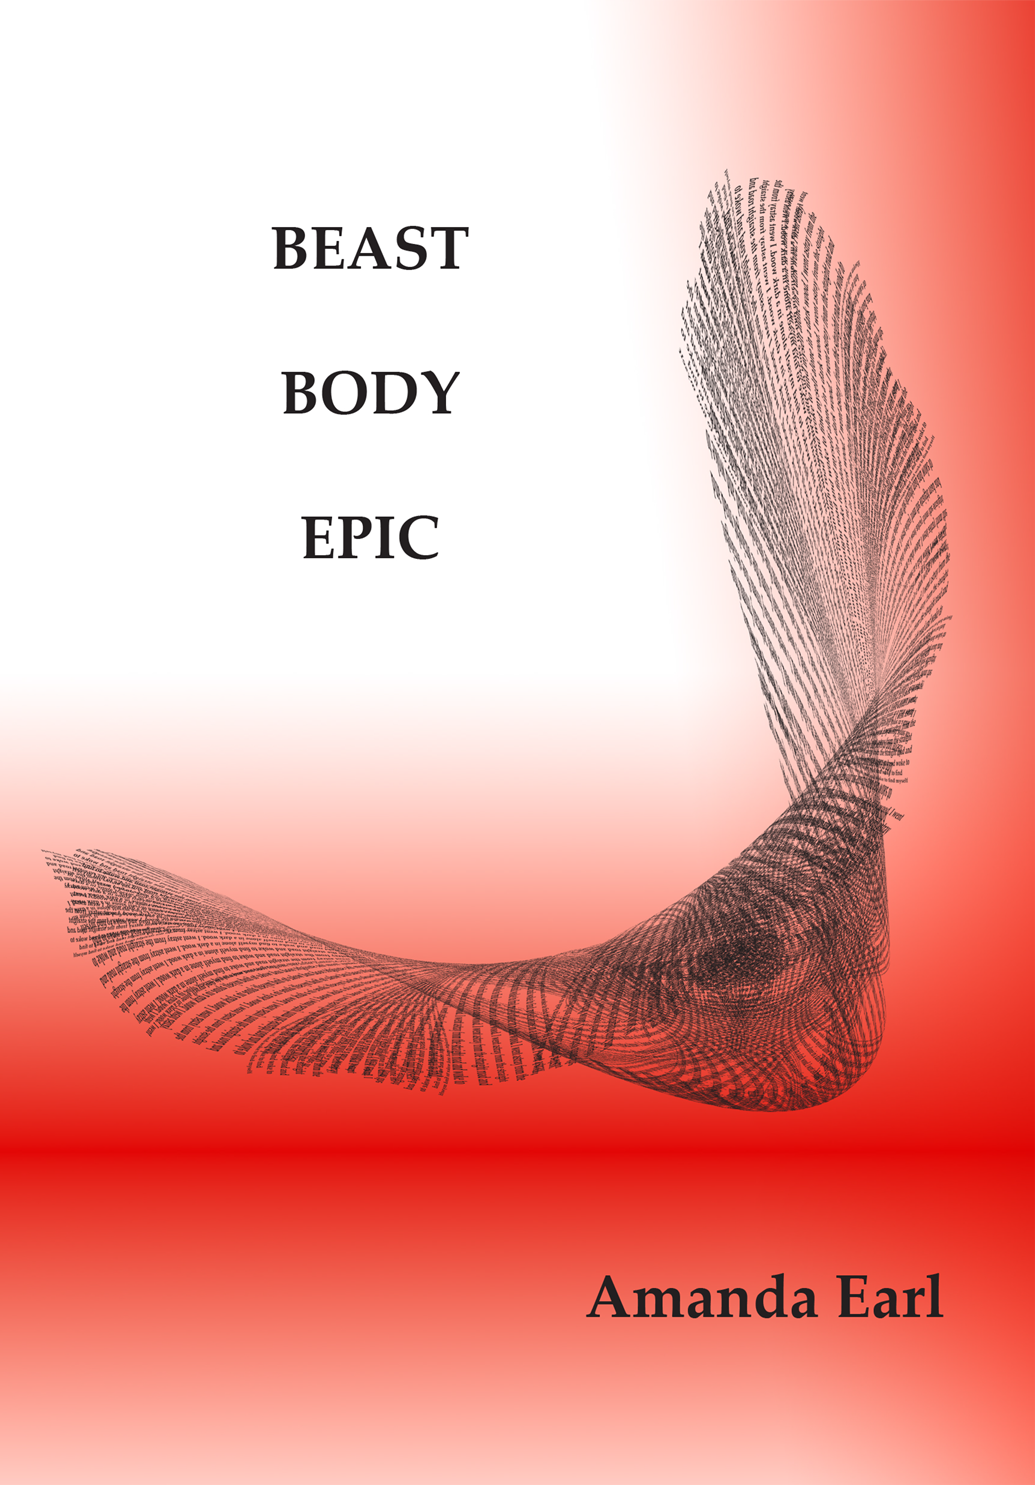 COVER: right hand side gradient red going down to bottom and on left; visual poem that swoops to the left; TEXT: BEAST/BODY/EPIC; Amanda Earl